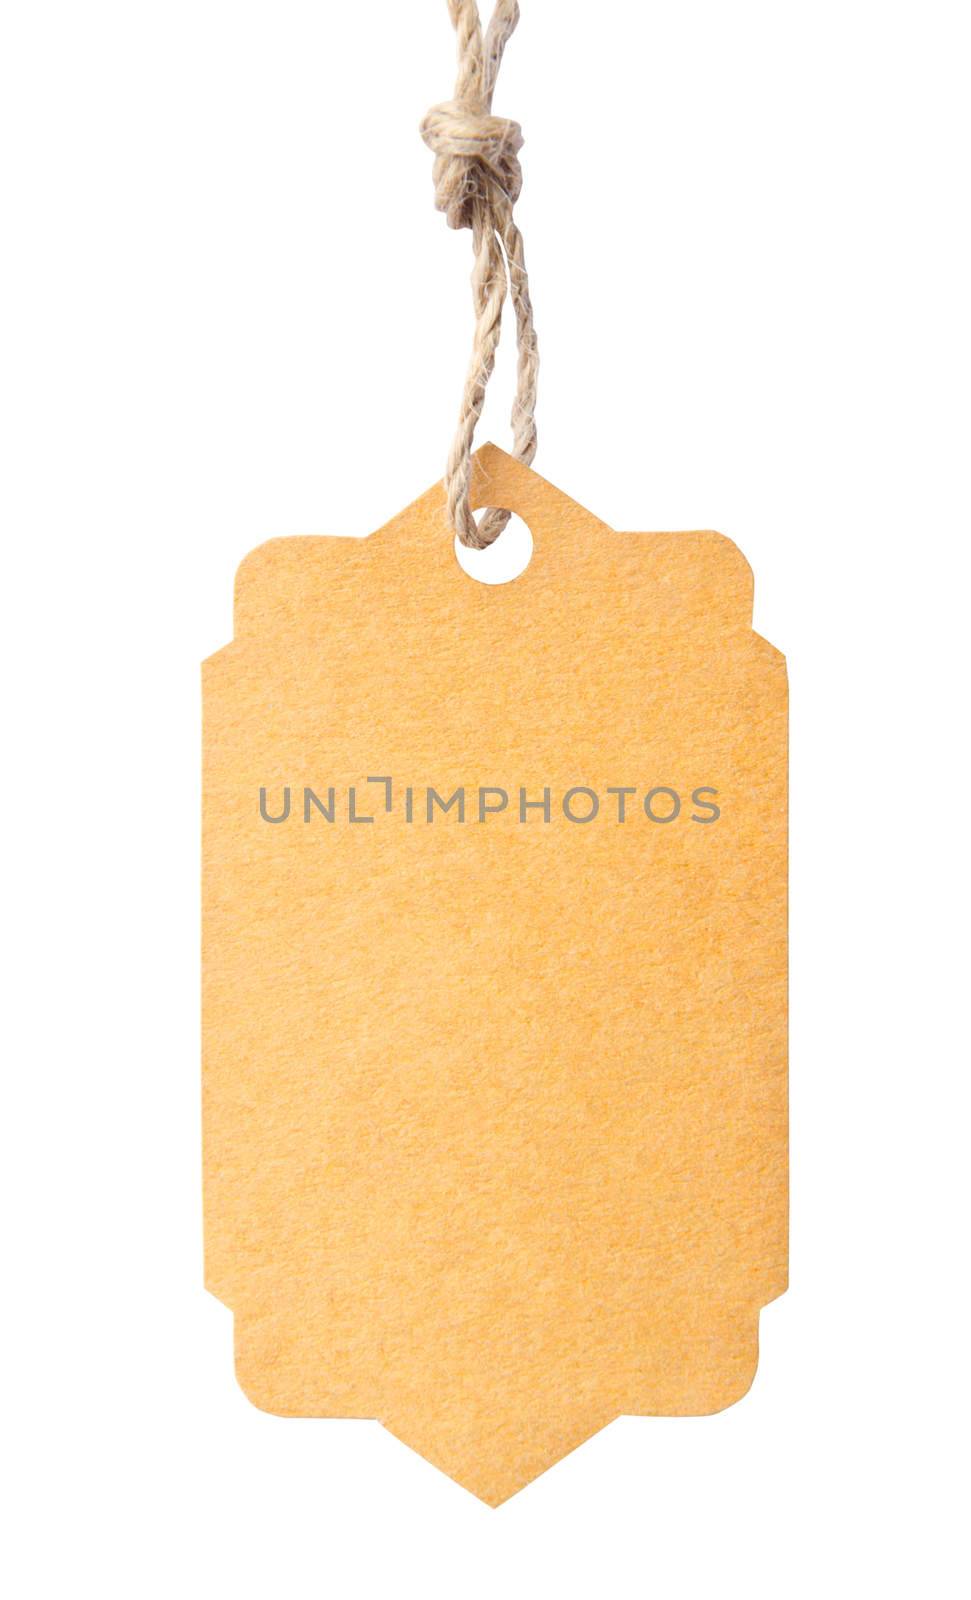 Blank tag tied with brown string isolated against a white backgr by Gamjai